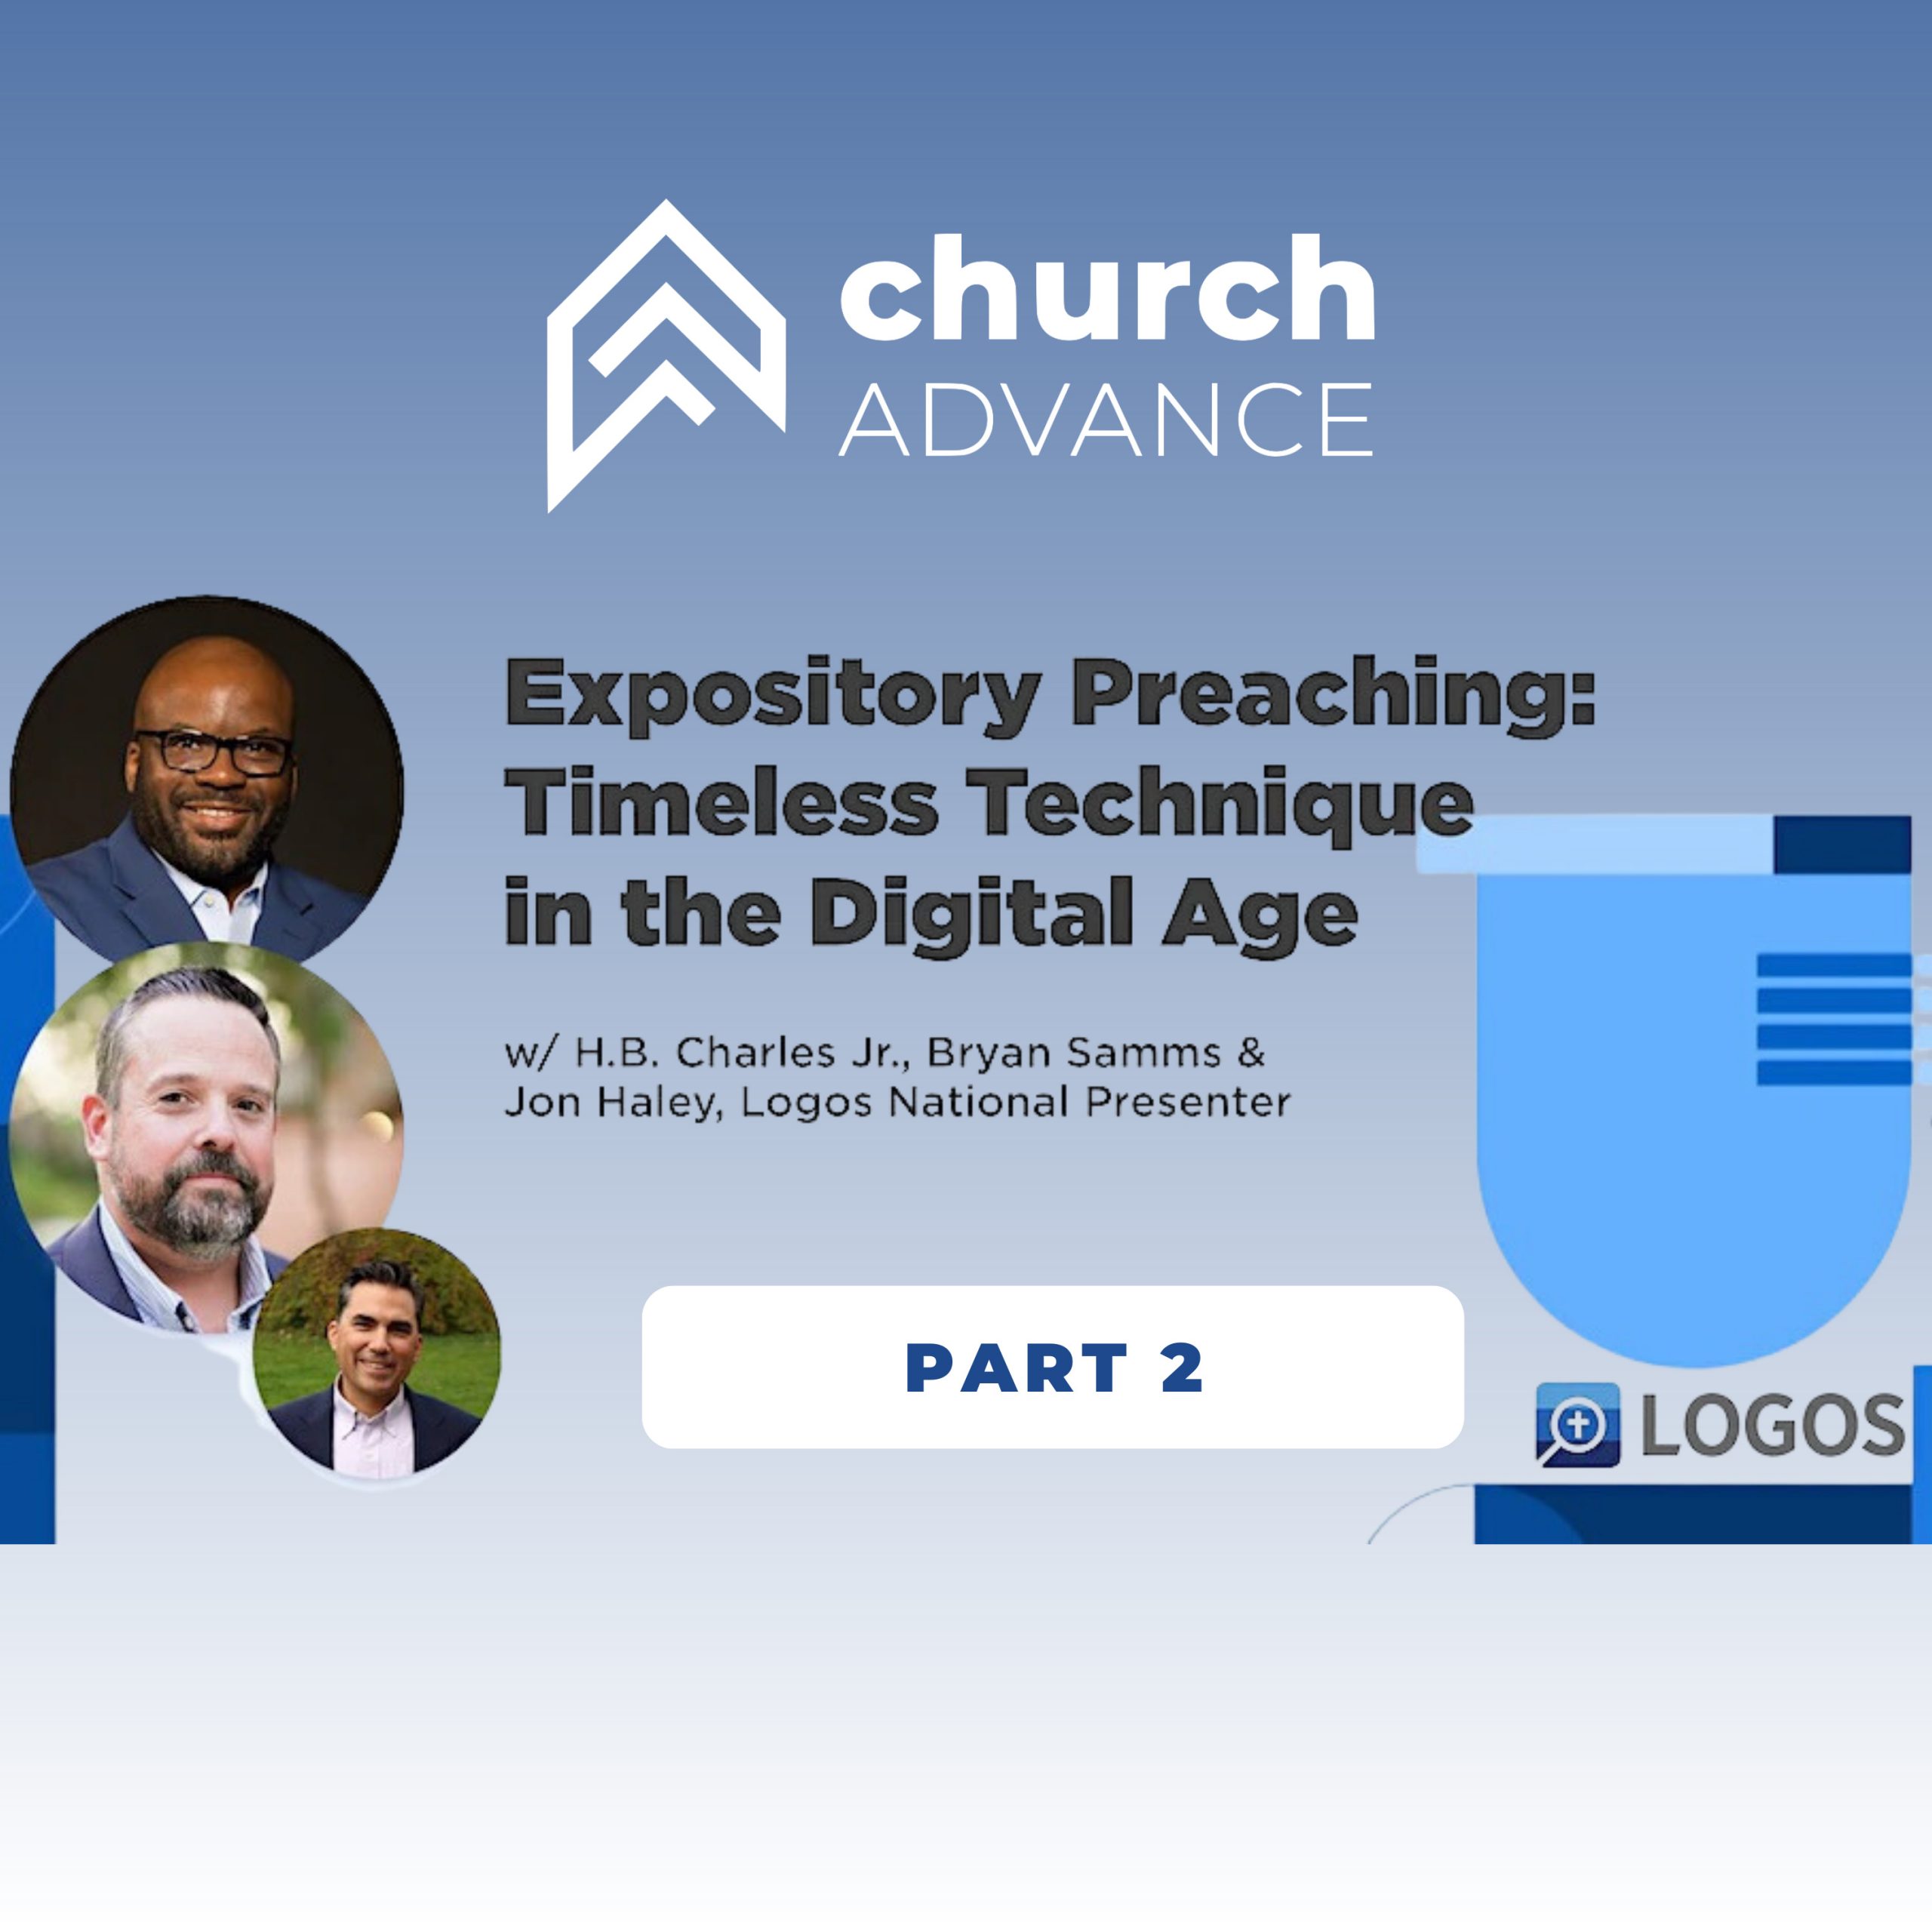 Expository Preaching: Timeless Technique in the Digital Age